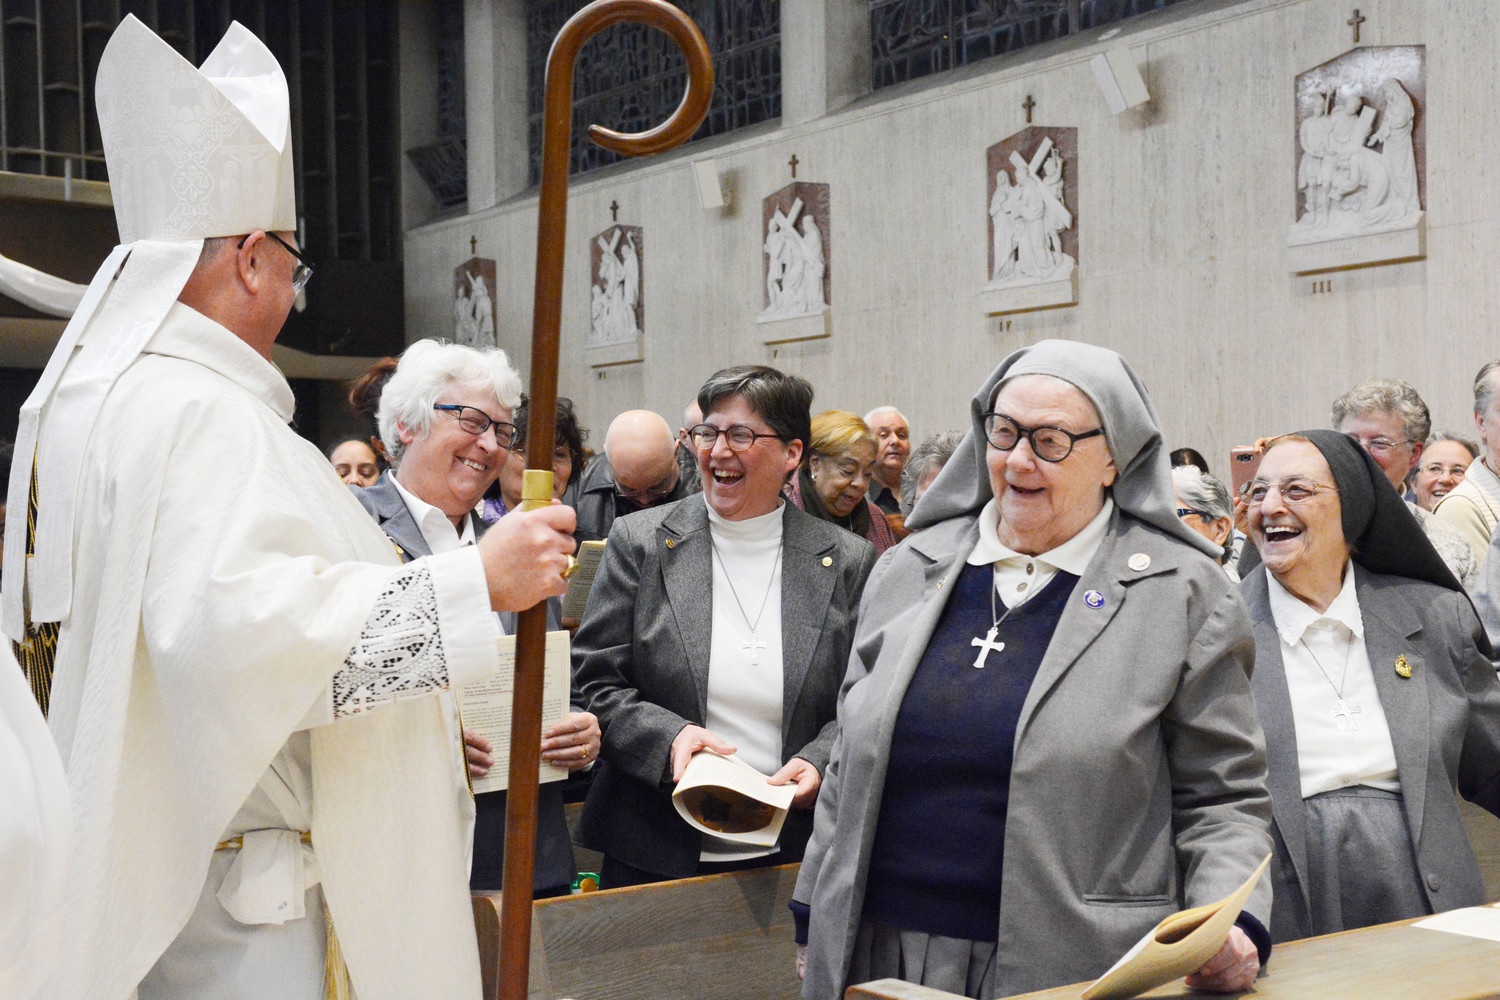 Cardinal Dolan speaks with Missionary Sisters of the Sacred Heart of Jesus, including Sister Barbara Louise Staley, M.S.C., general superior, second row left, at St. Frances Cabrini Shrine in Manhattan Dec. 16.